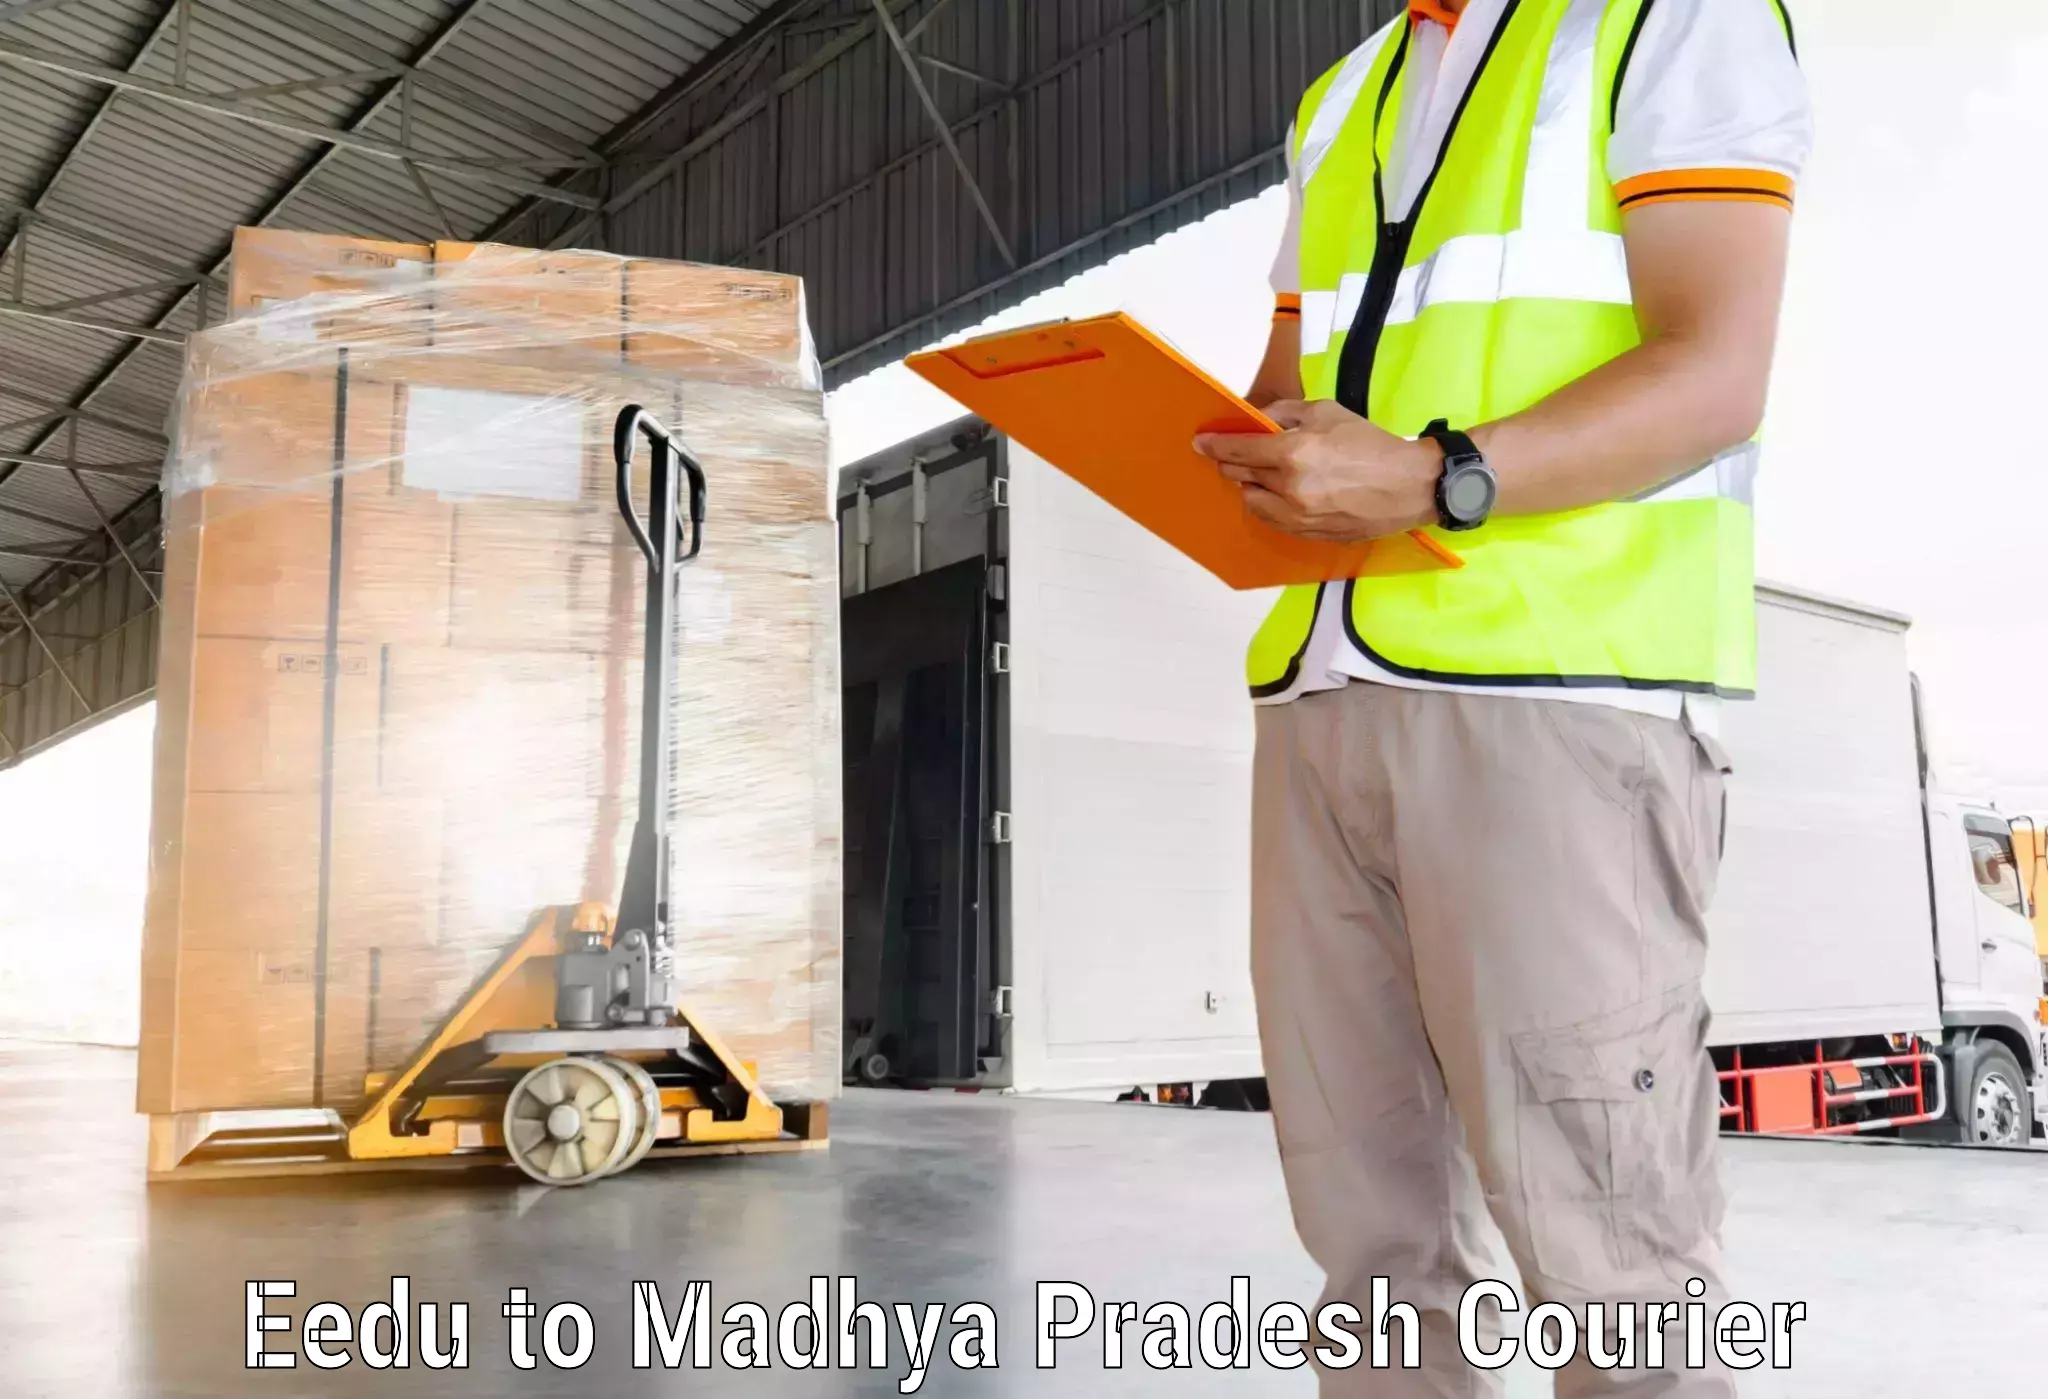 Easy access courier services in Eedu to Burhar